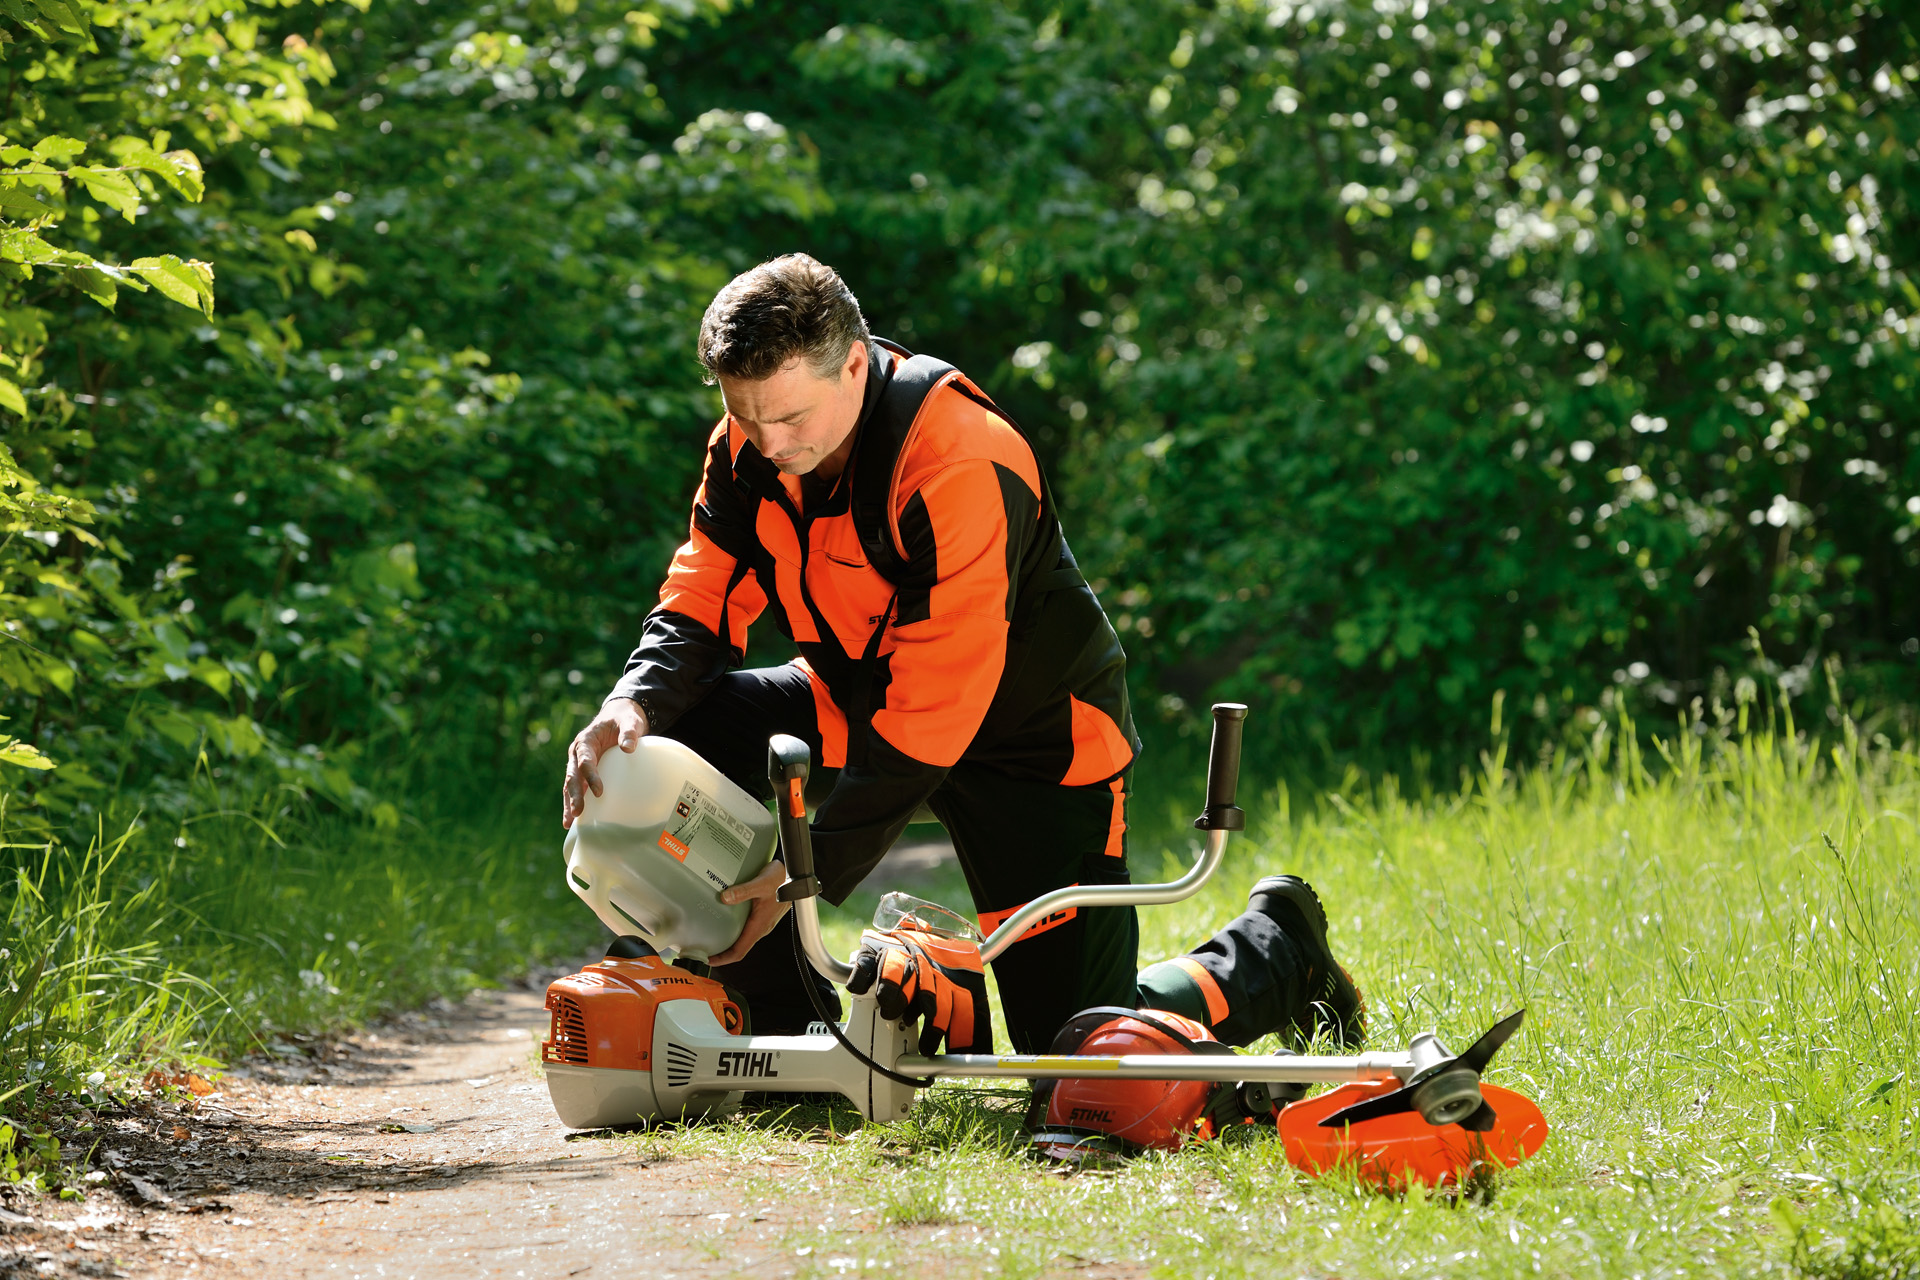 https://www.stihl.de/content/dam/stihl/mediapool/products/brushcutters-and-clearing-saws/general/293d728d441a482990cdb9d3bf59851a.jpg